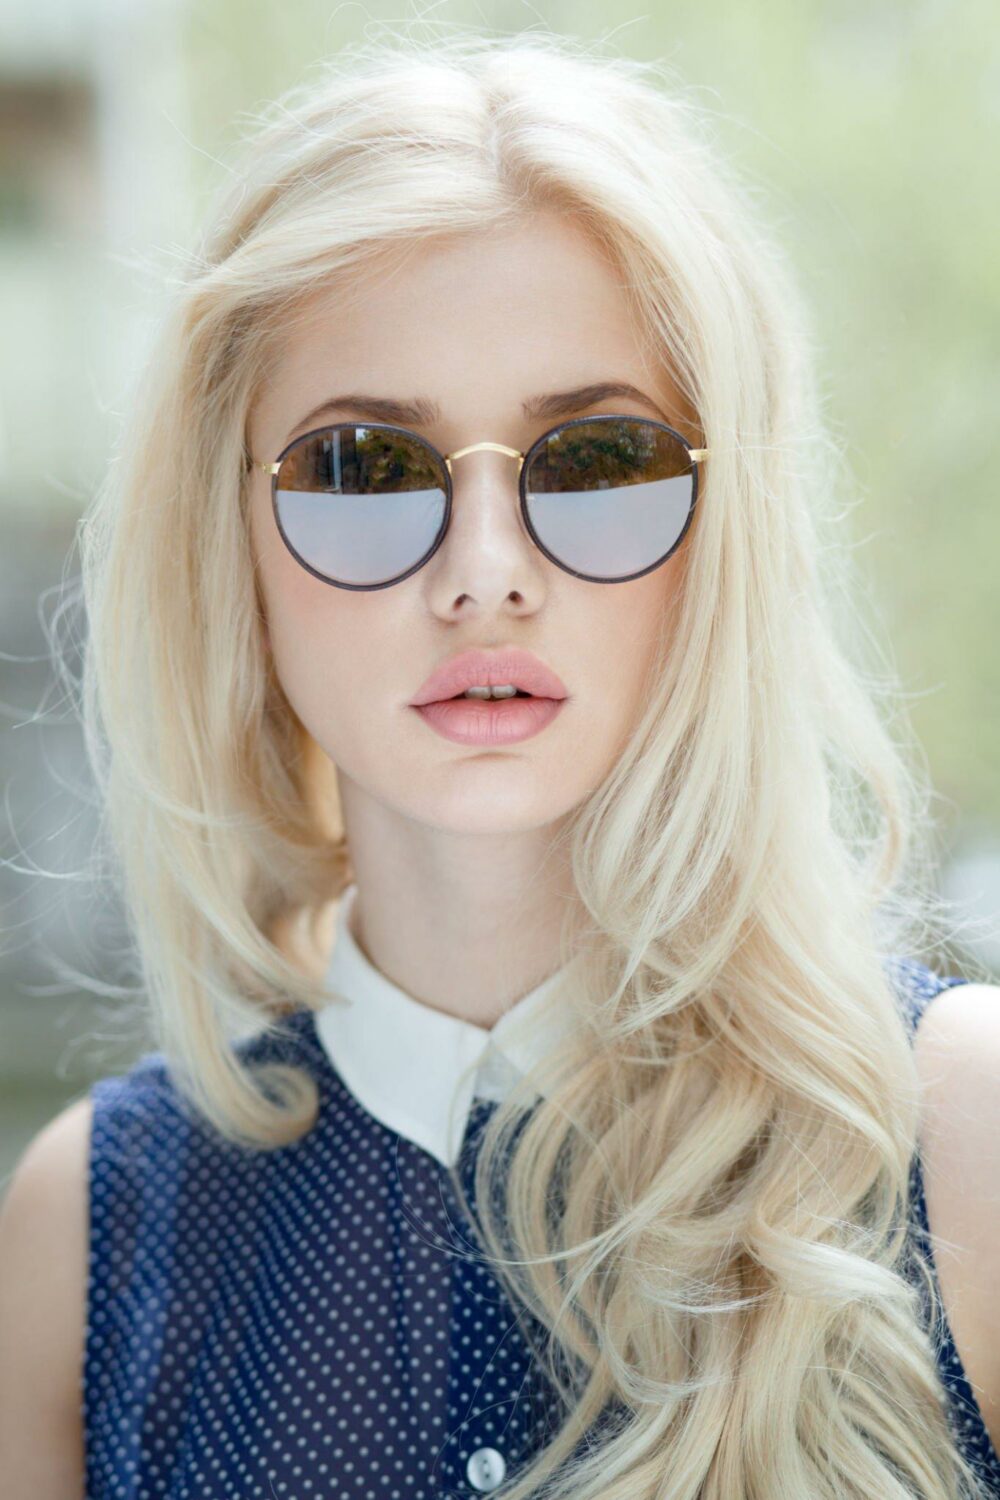 Oval oblong are a great complements to the round shape of these trendy black sunglasses